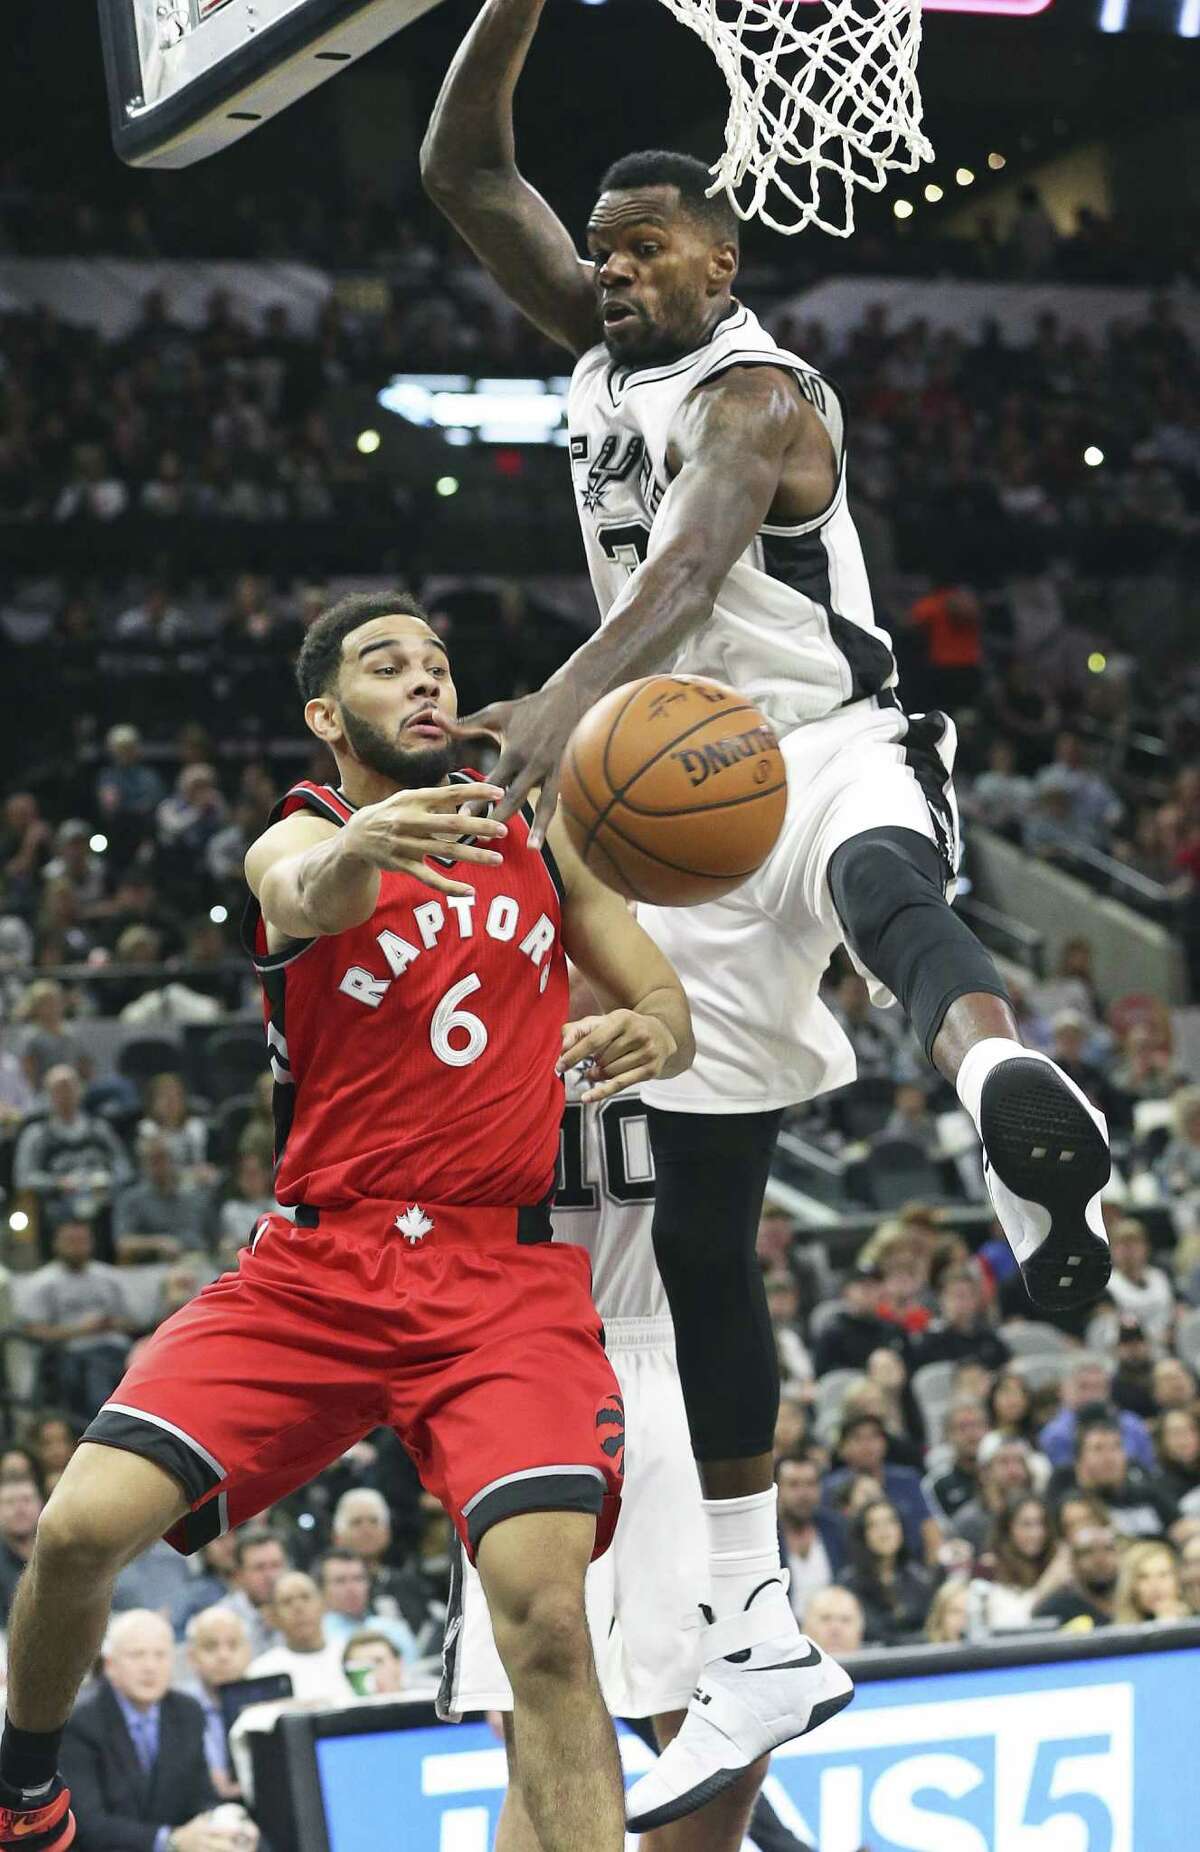 Dwayne Dedman forces Cory Joseph to pass to the outside as the Spurs play the Raptors at the AT&T Center on January 3, 2016.